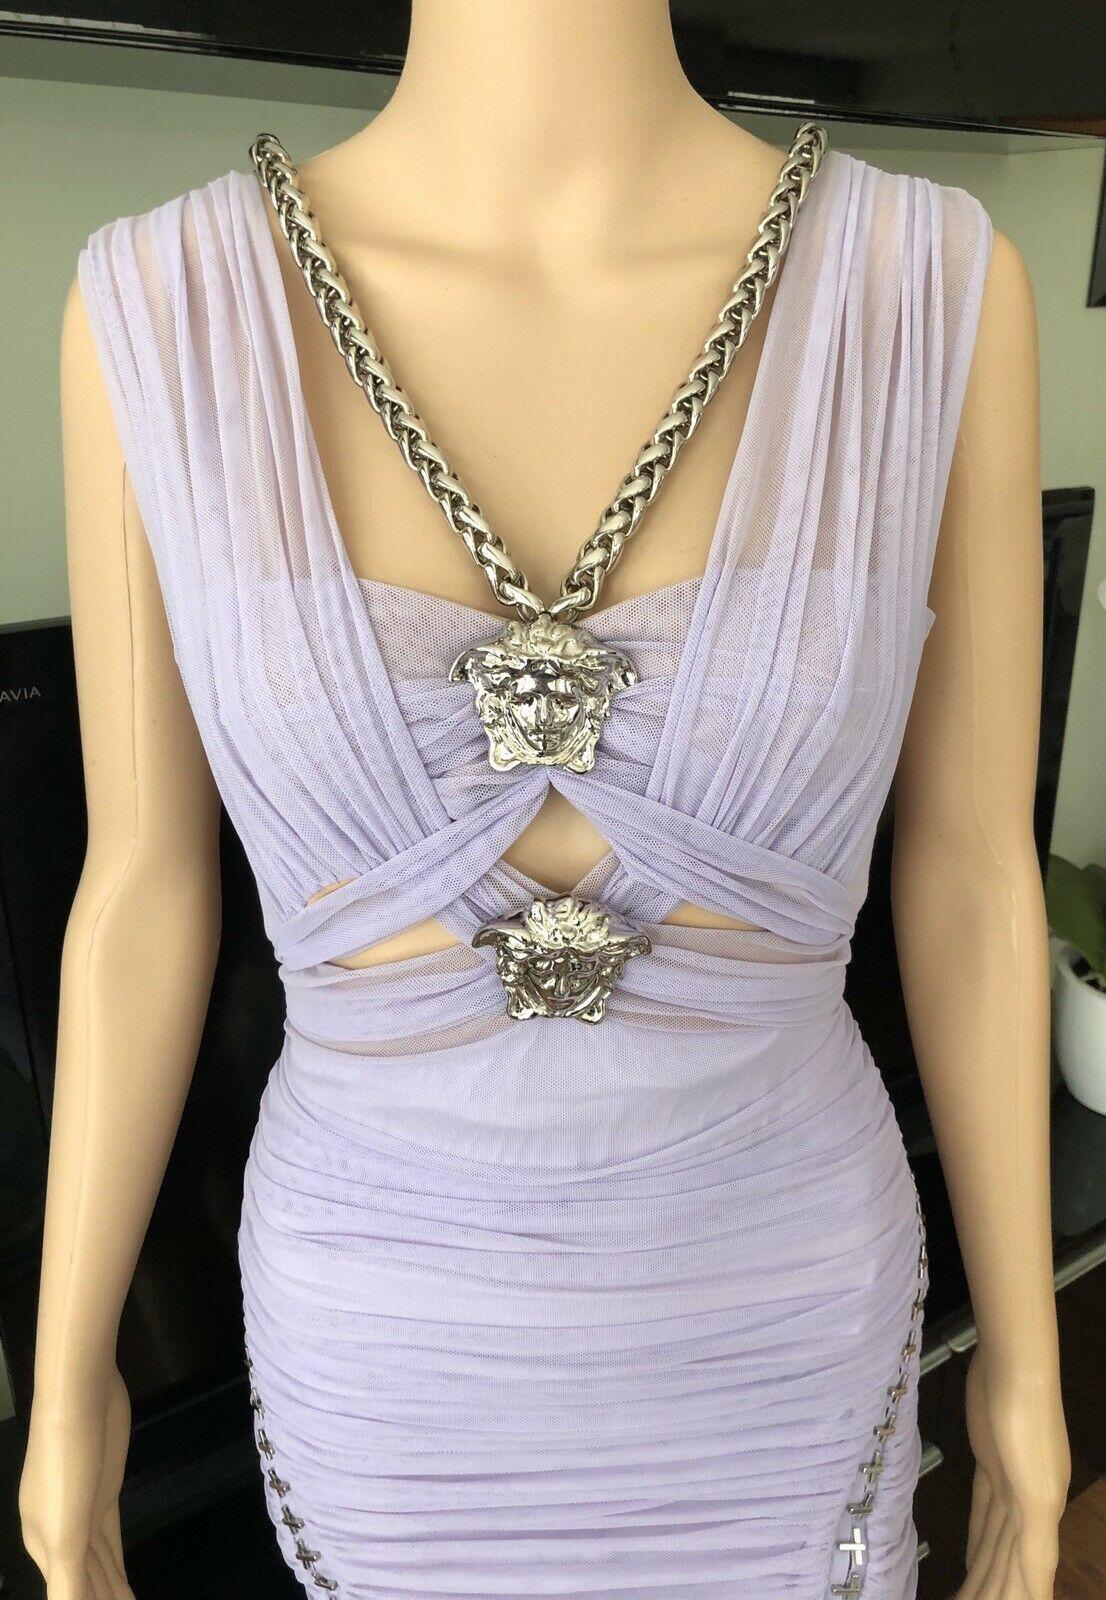 New Versace Runway Medusa and Chain Embellished Cutout Dress IT 42 Editorial Piece!

Lavender Versace knee-length dress featuring V-neck, silver-tone Medusa head embellishments at bust with chain-link trim, ruched accents throughout and zip closure